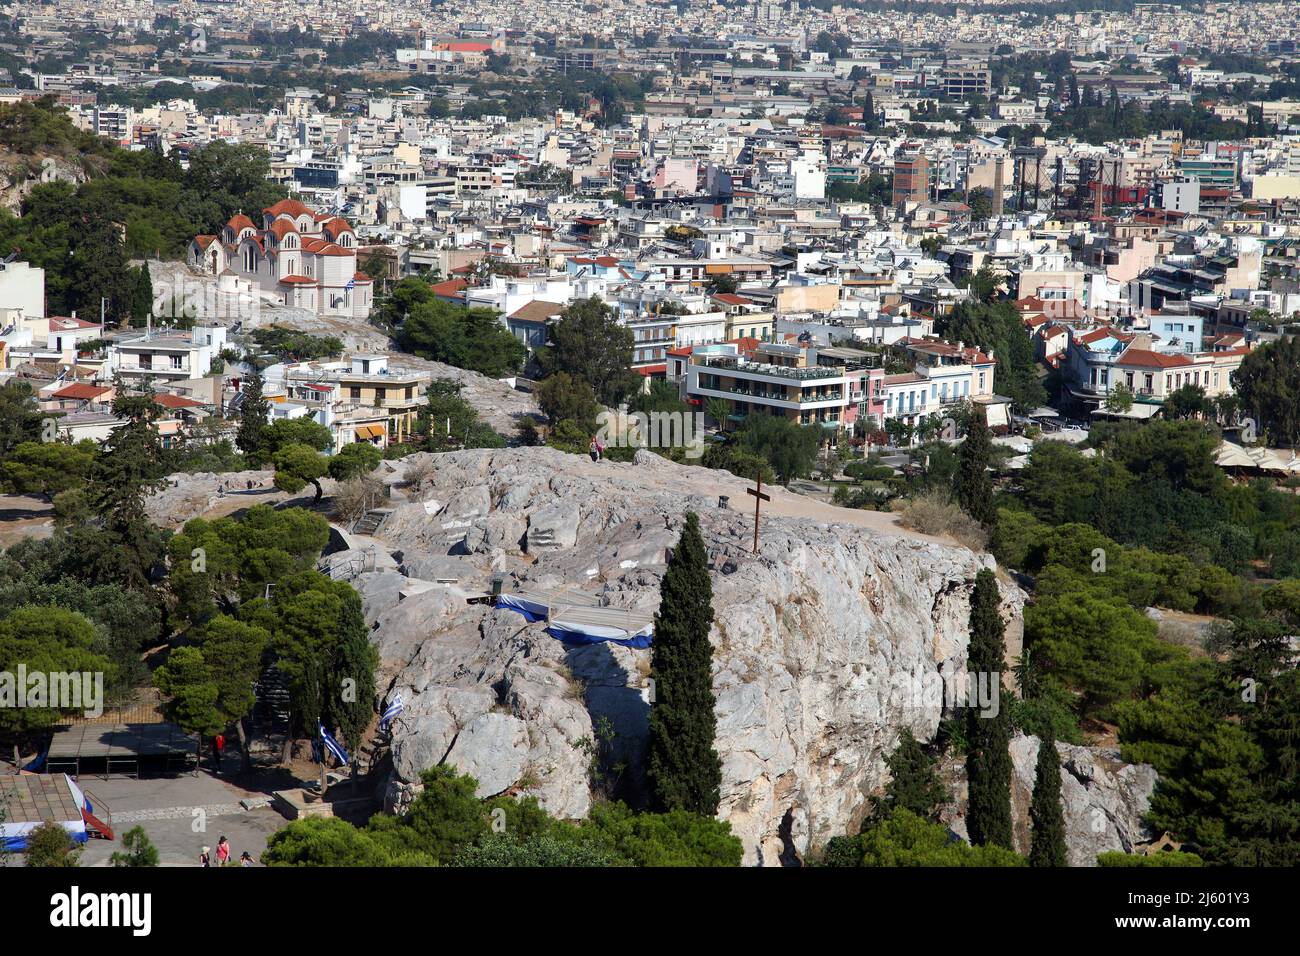 Areopagus (Mars Hill) behind Athens City from Acropolis in Greece. Mars Hill is a prominent site located 140 feet below the Acropolis. Stock Photo